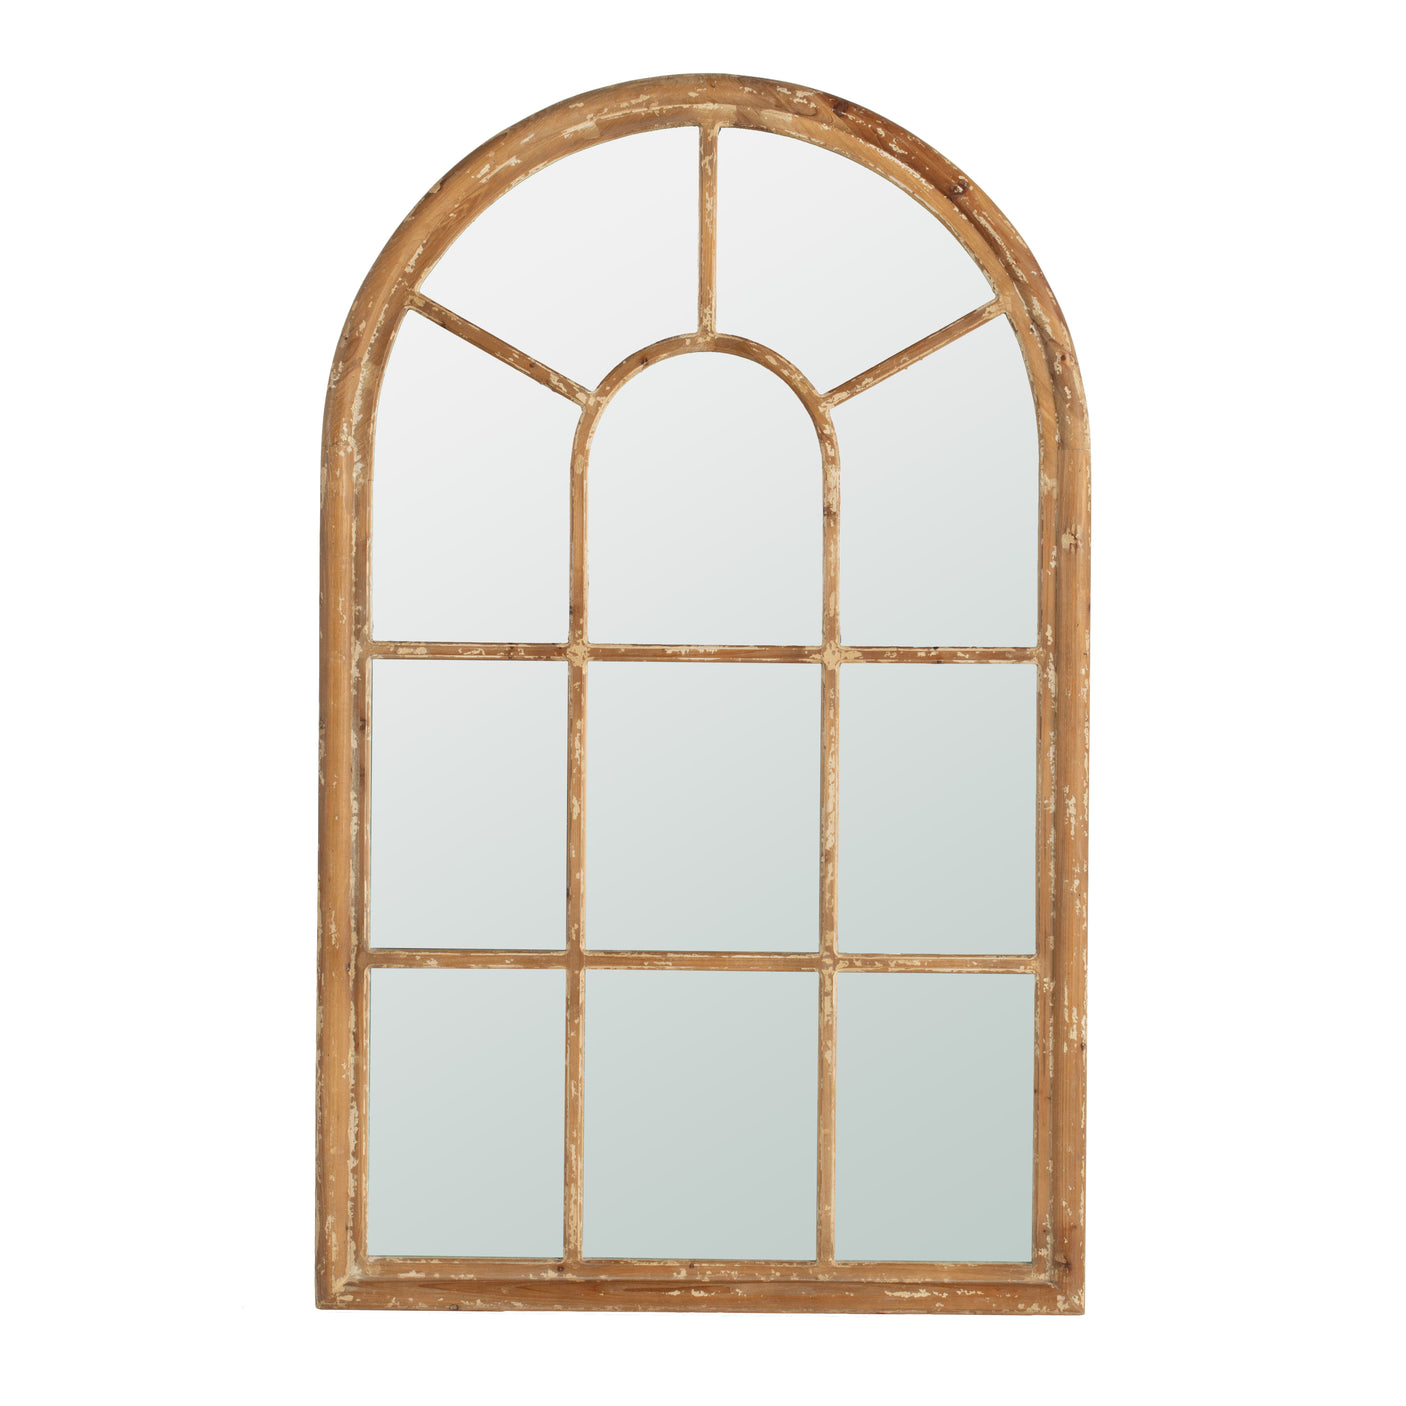 34x54.3" Large Arched Accent Mirror with Brown Frame with Decorative Window Look Classic Architecture Style Solid Fir Wood Interior Decor - Home Elegance USA